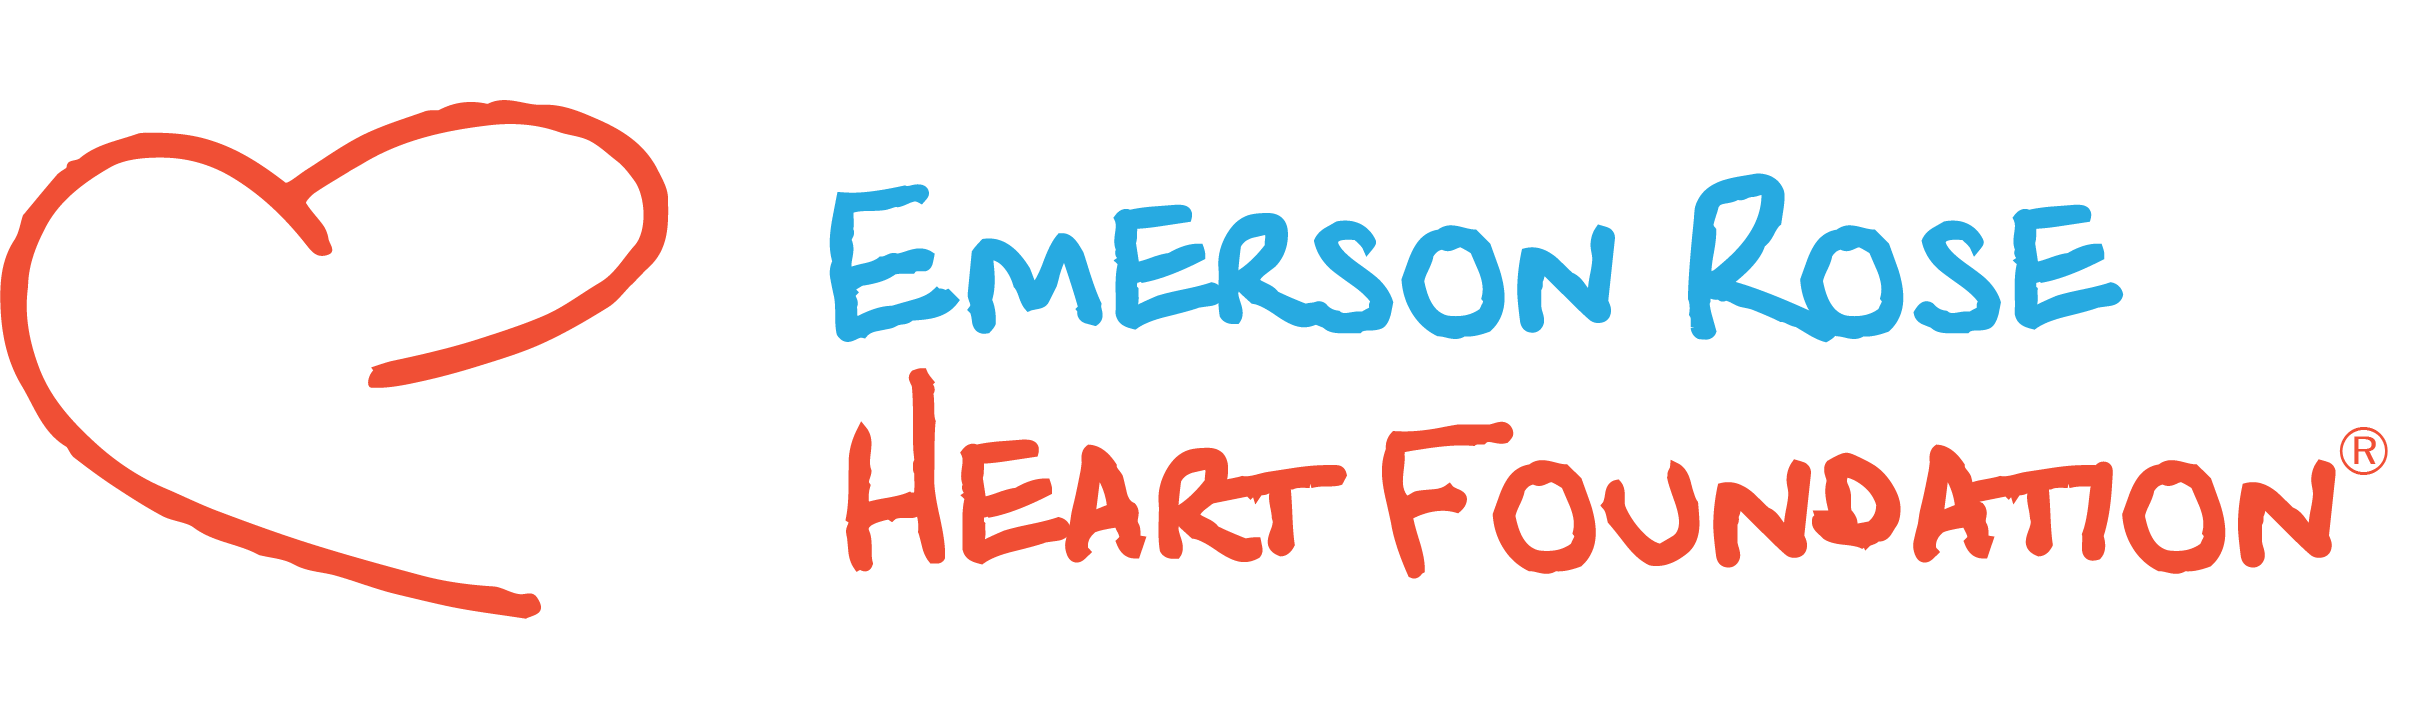  A Emerson Rose Heart Foundation.